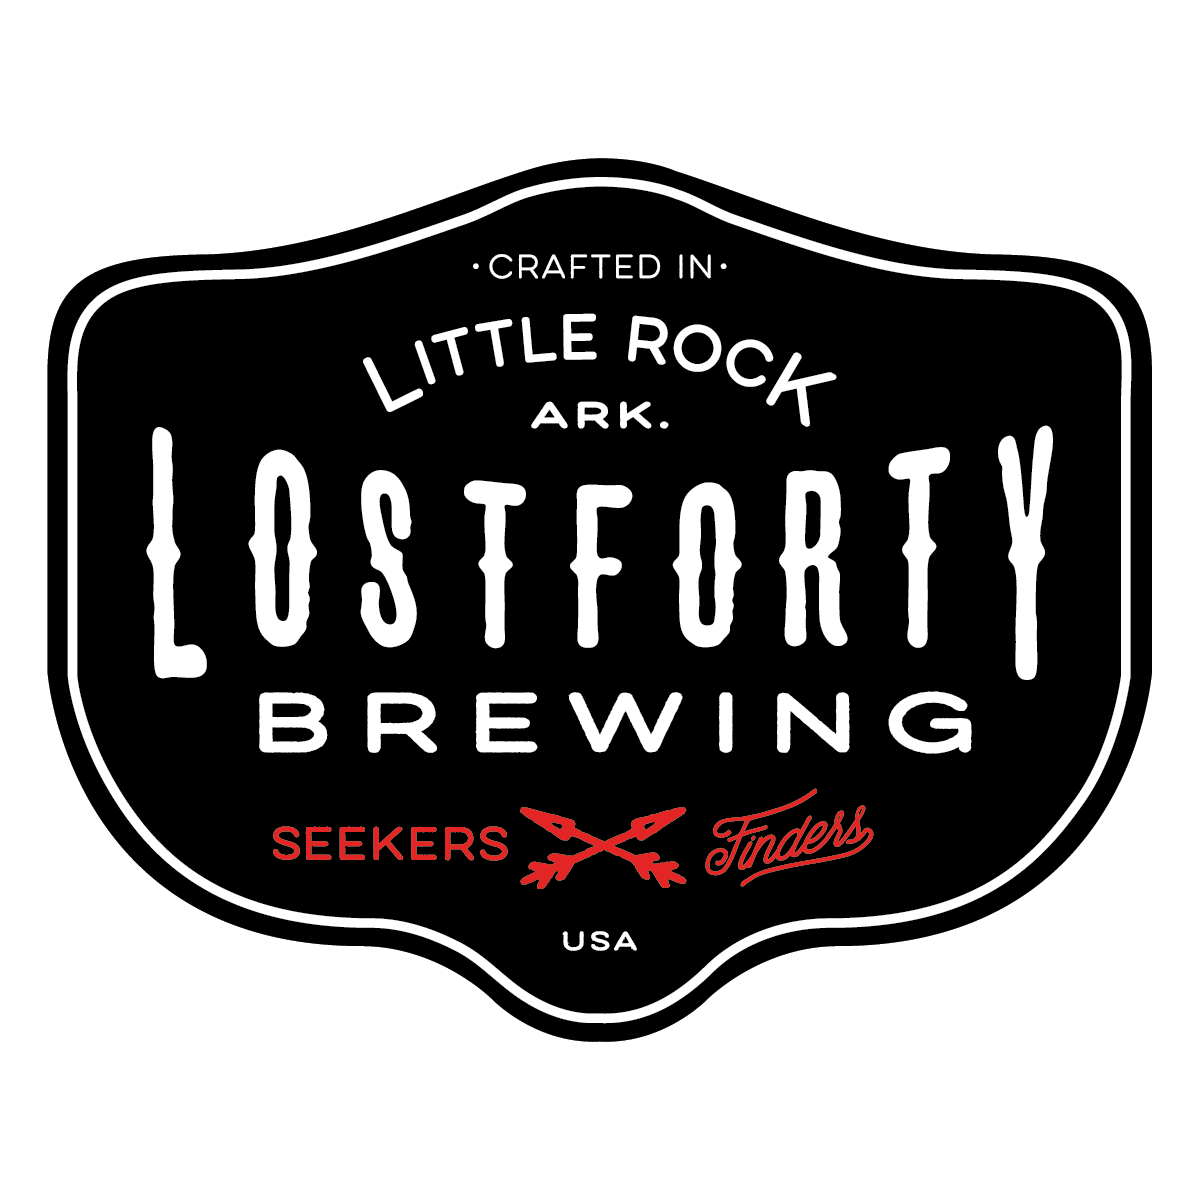 Lost Forty Brewing Logo: A black shield that says "Crafted in Little Rock ARK. LOSTFORTY Brewing.